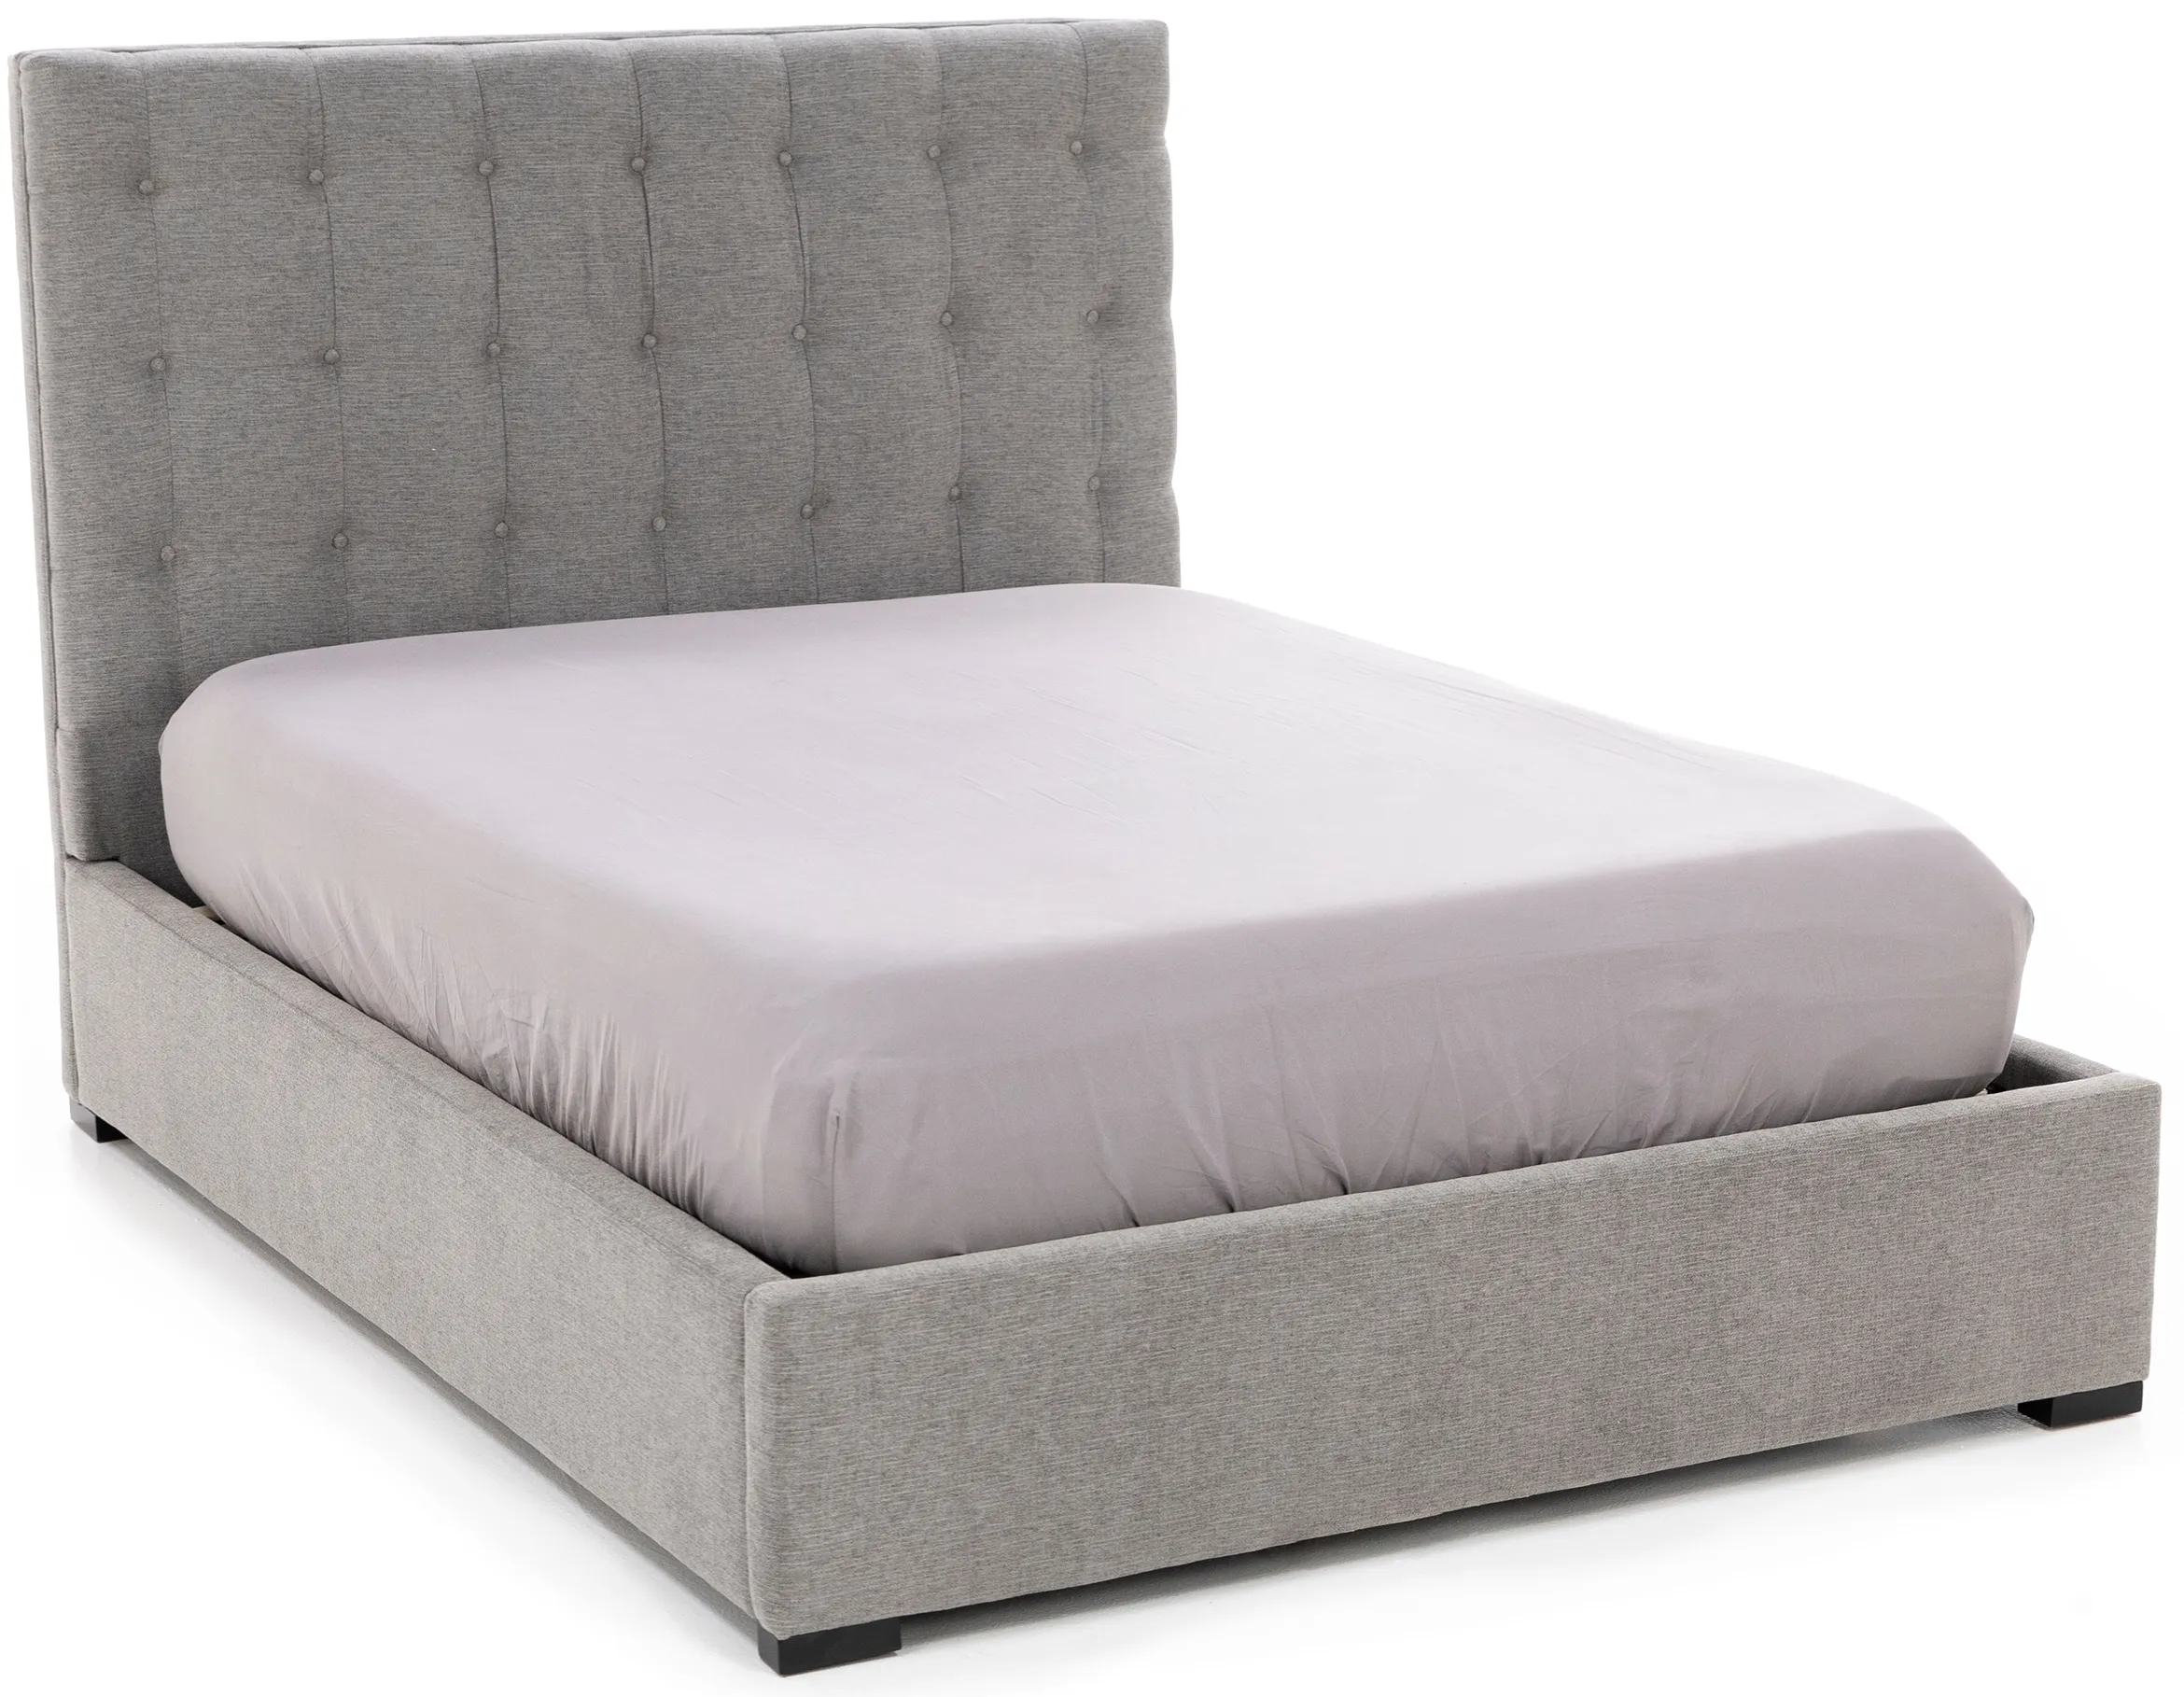 Abby Queen Upholstered Bed in Merit Greystone